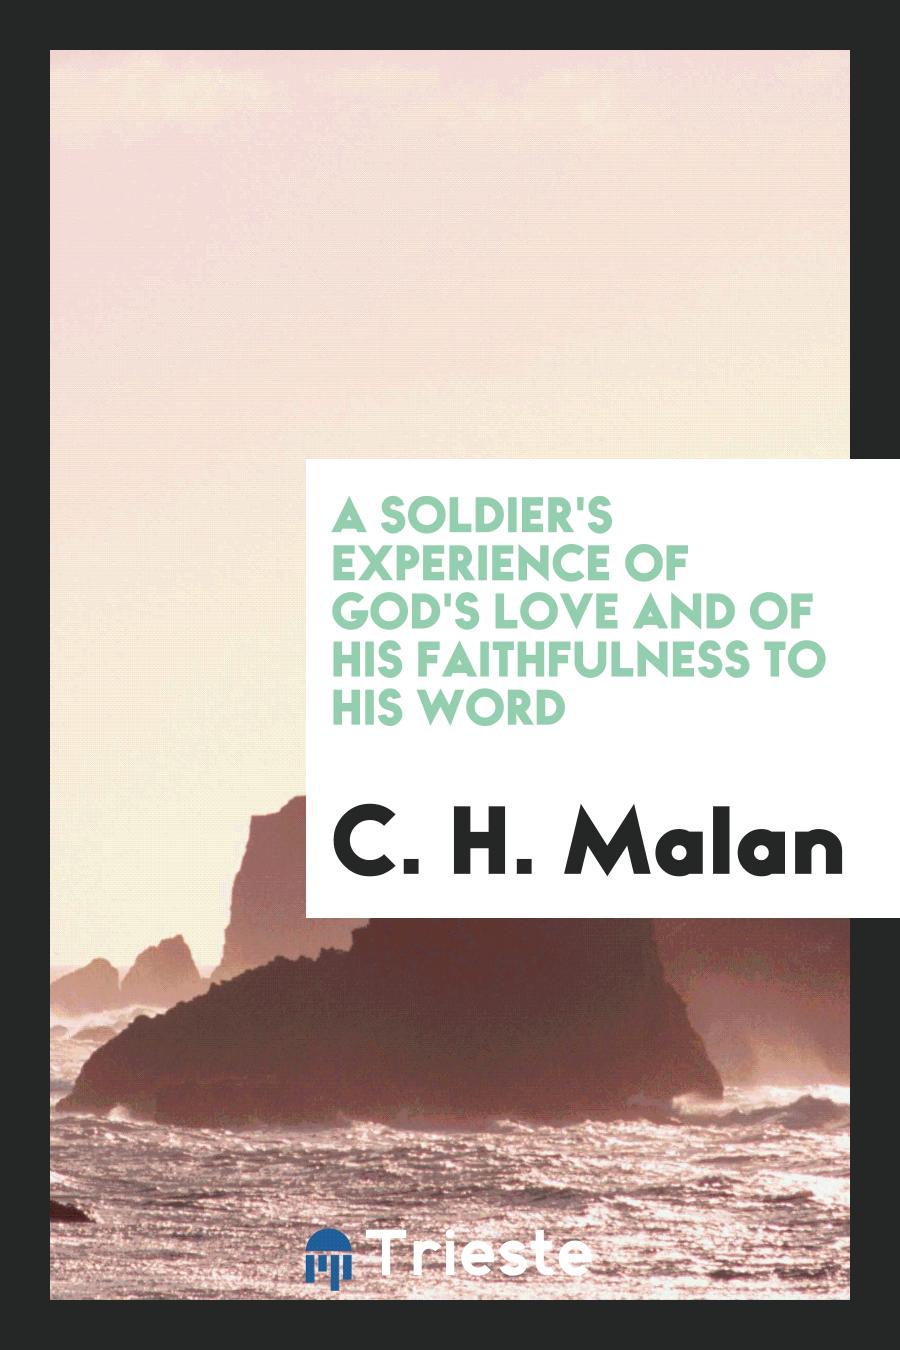 A Soldier's Experience of God's Love and of His Faithfulness to His Word